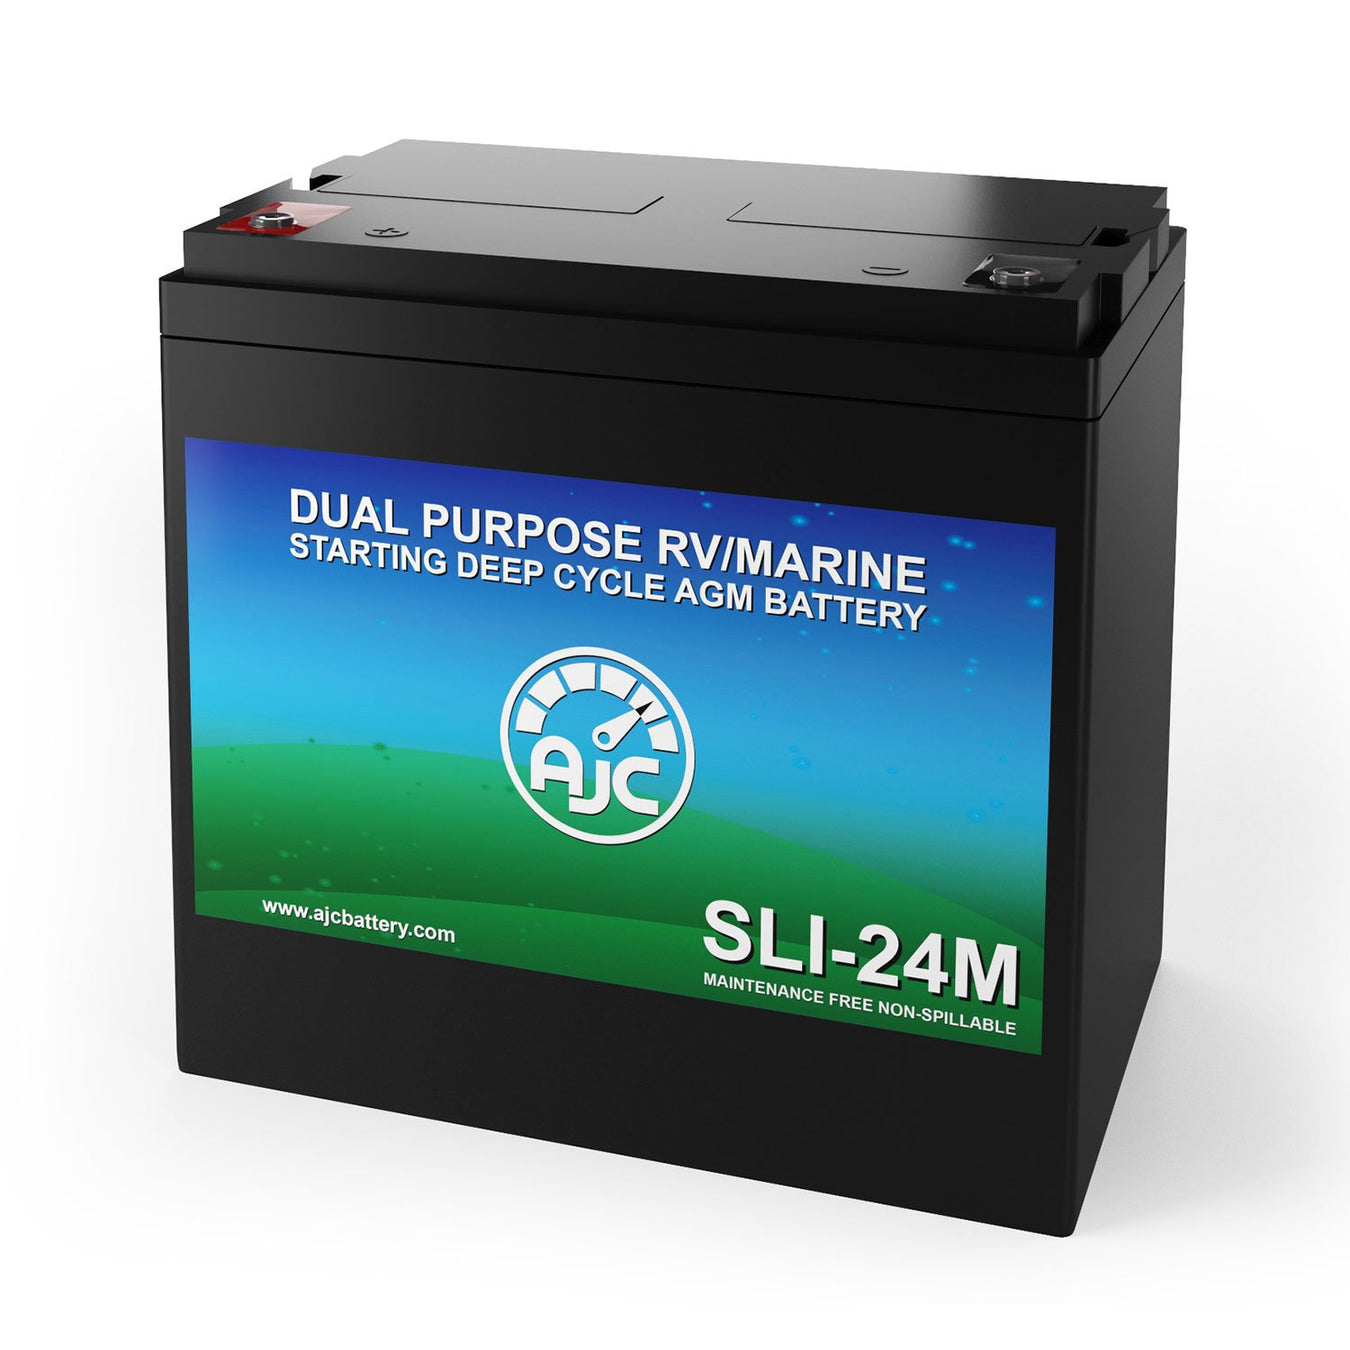 Starting Marine and Boat Batteries